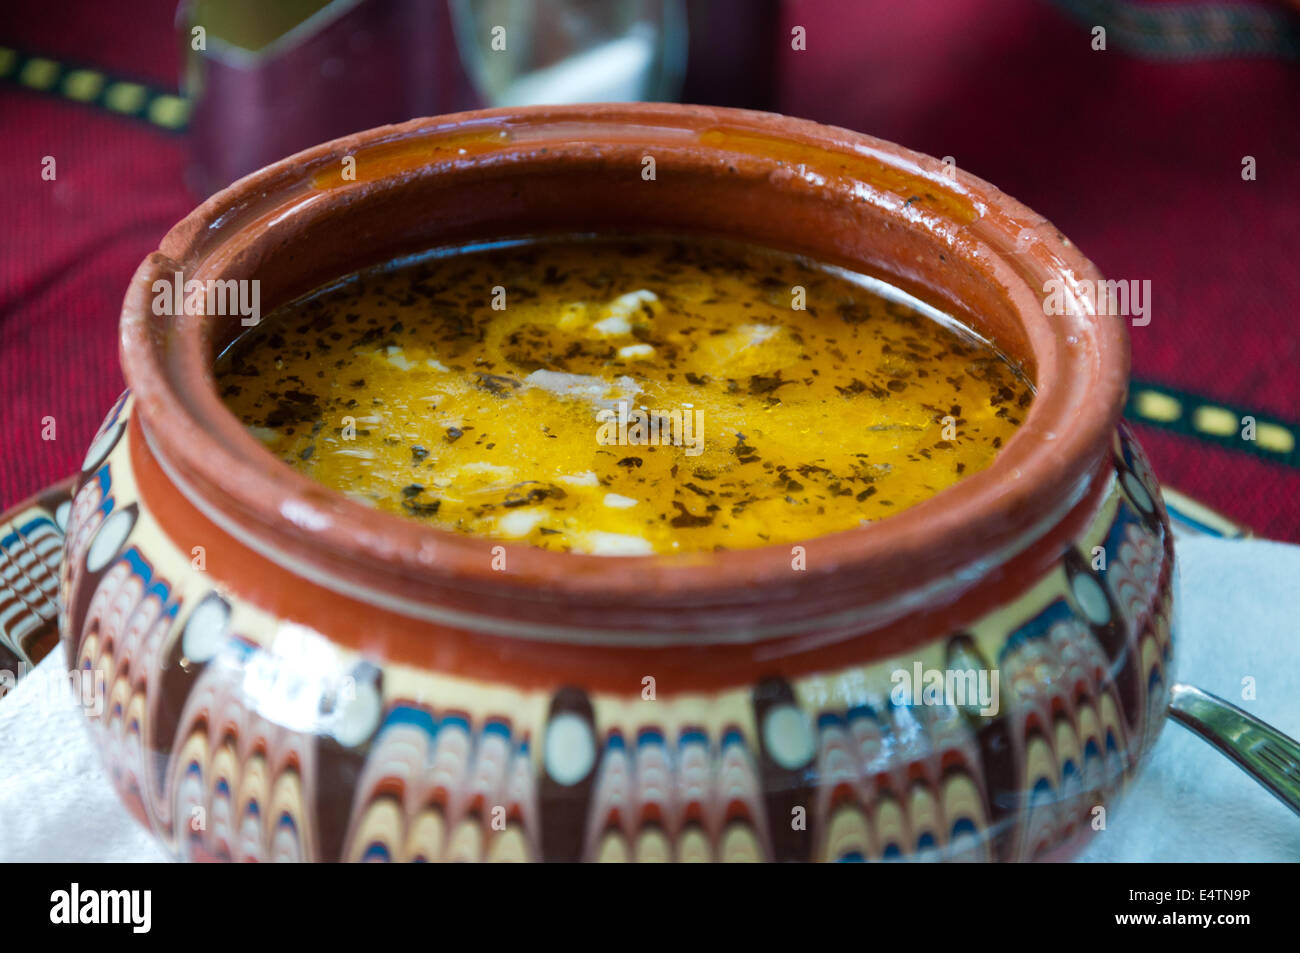 Bulgarian soup in high plate Stock Photo